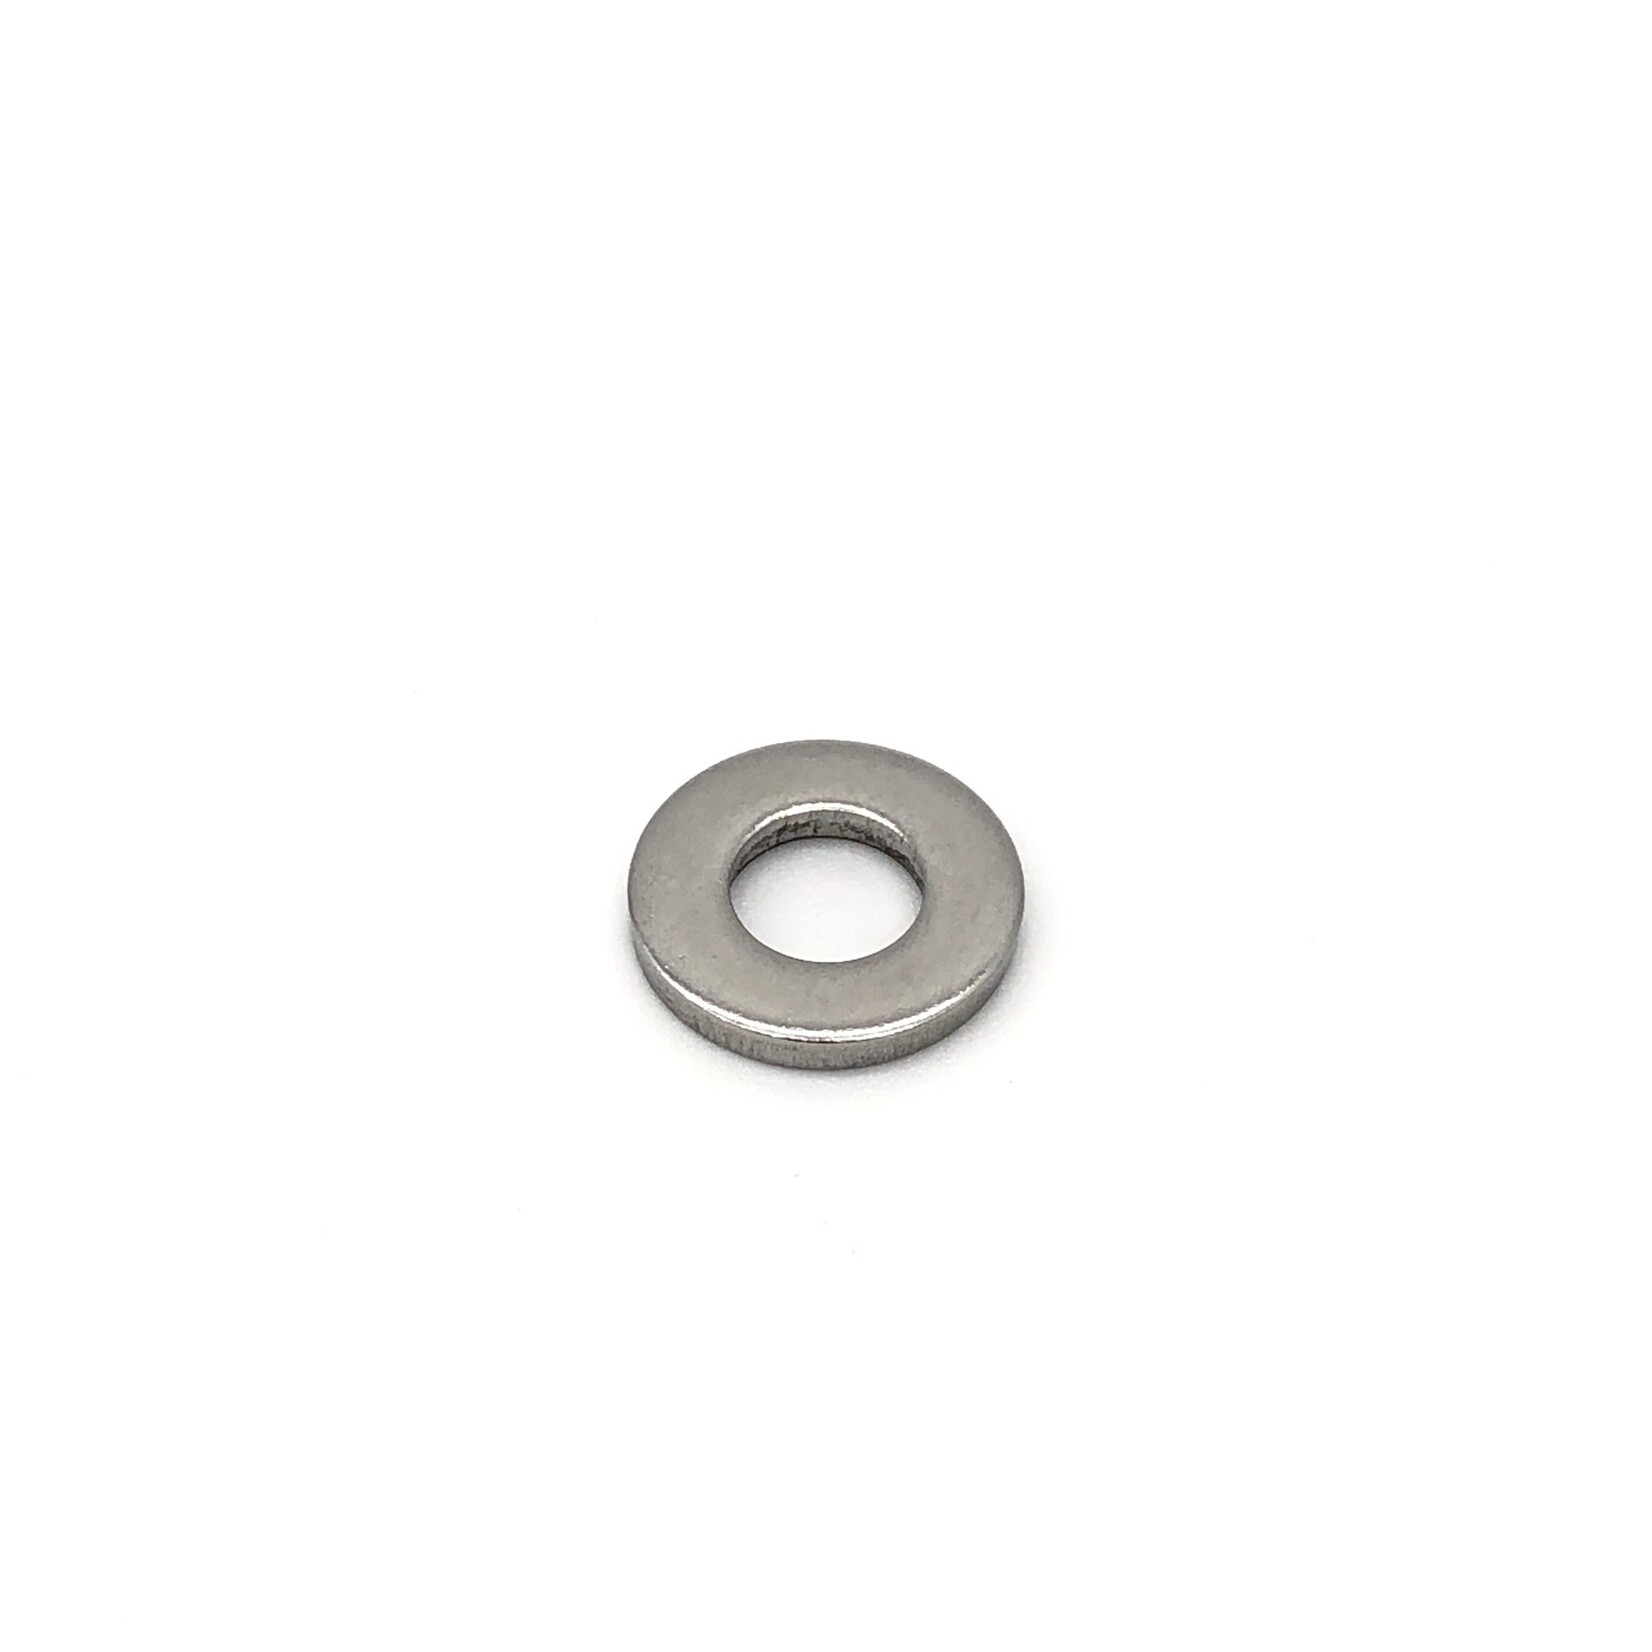 Cannon Cannon Metal Tension Rod Washer